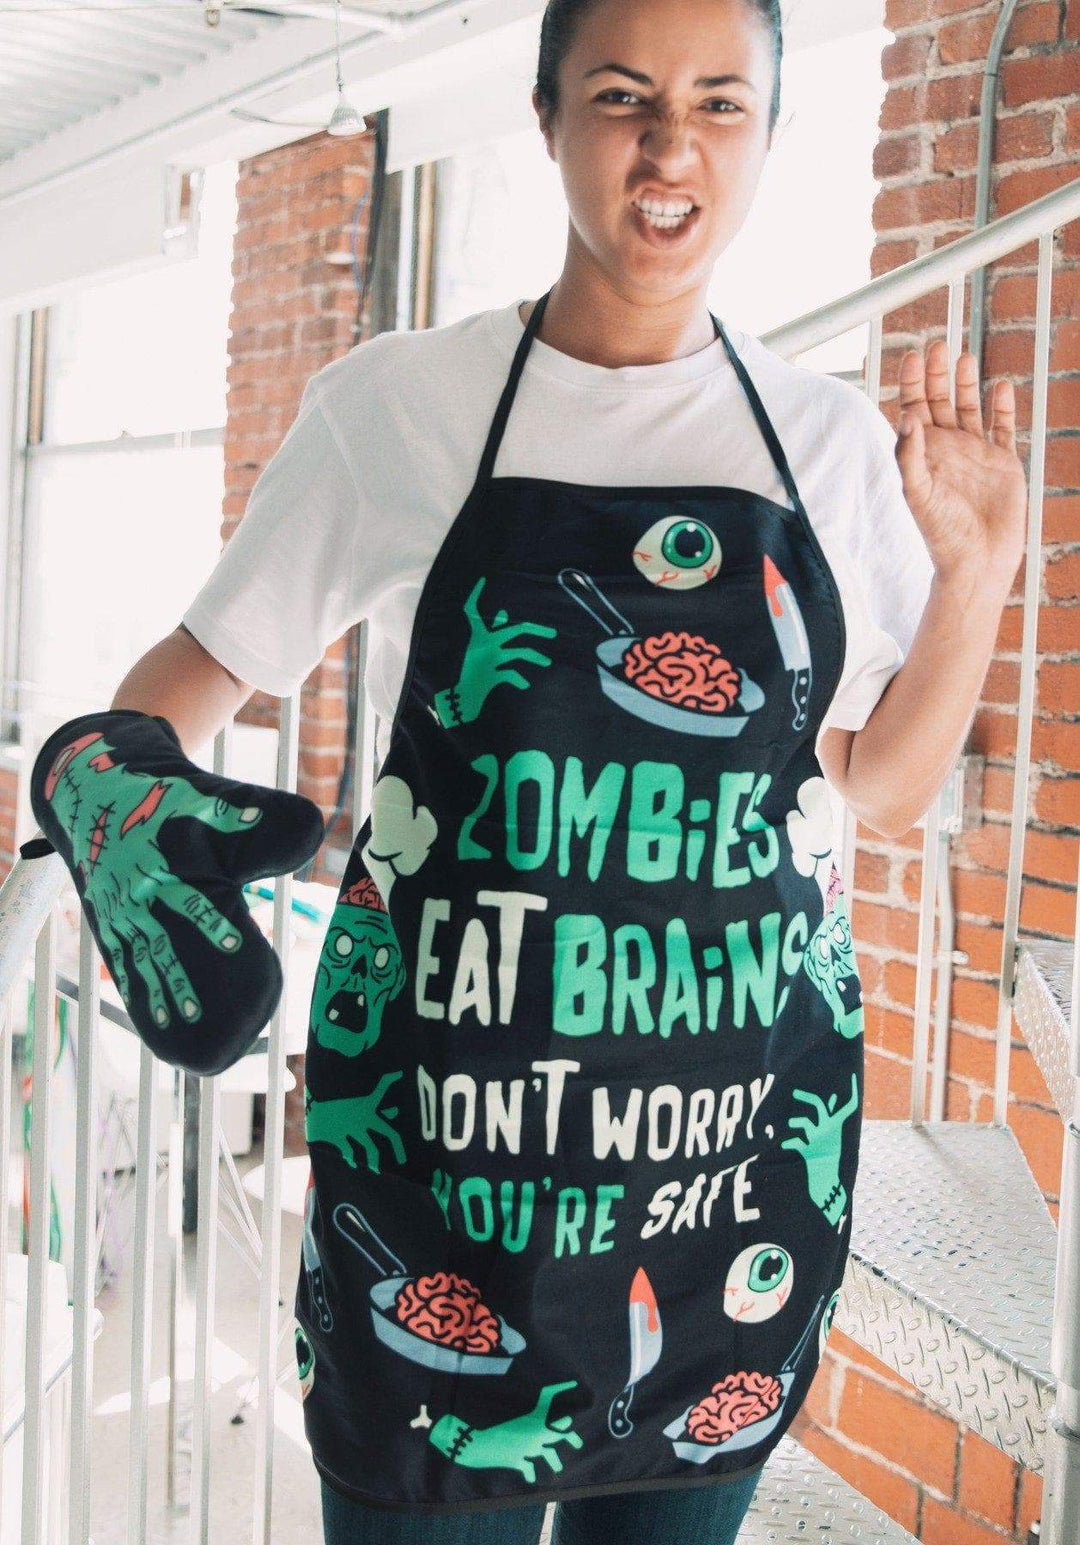 Zombies Eat Brains Don't Worry You're Safe Apron - Crazy Dog T-Shirts